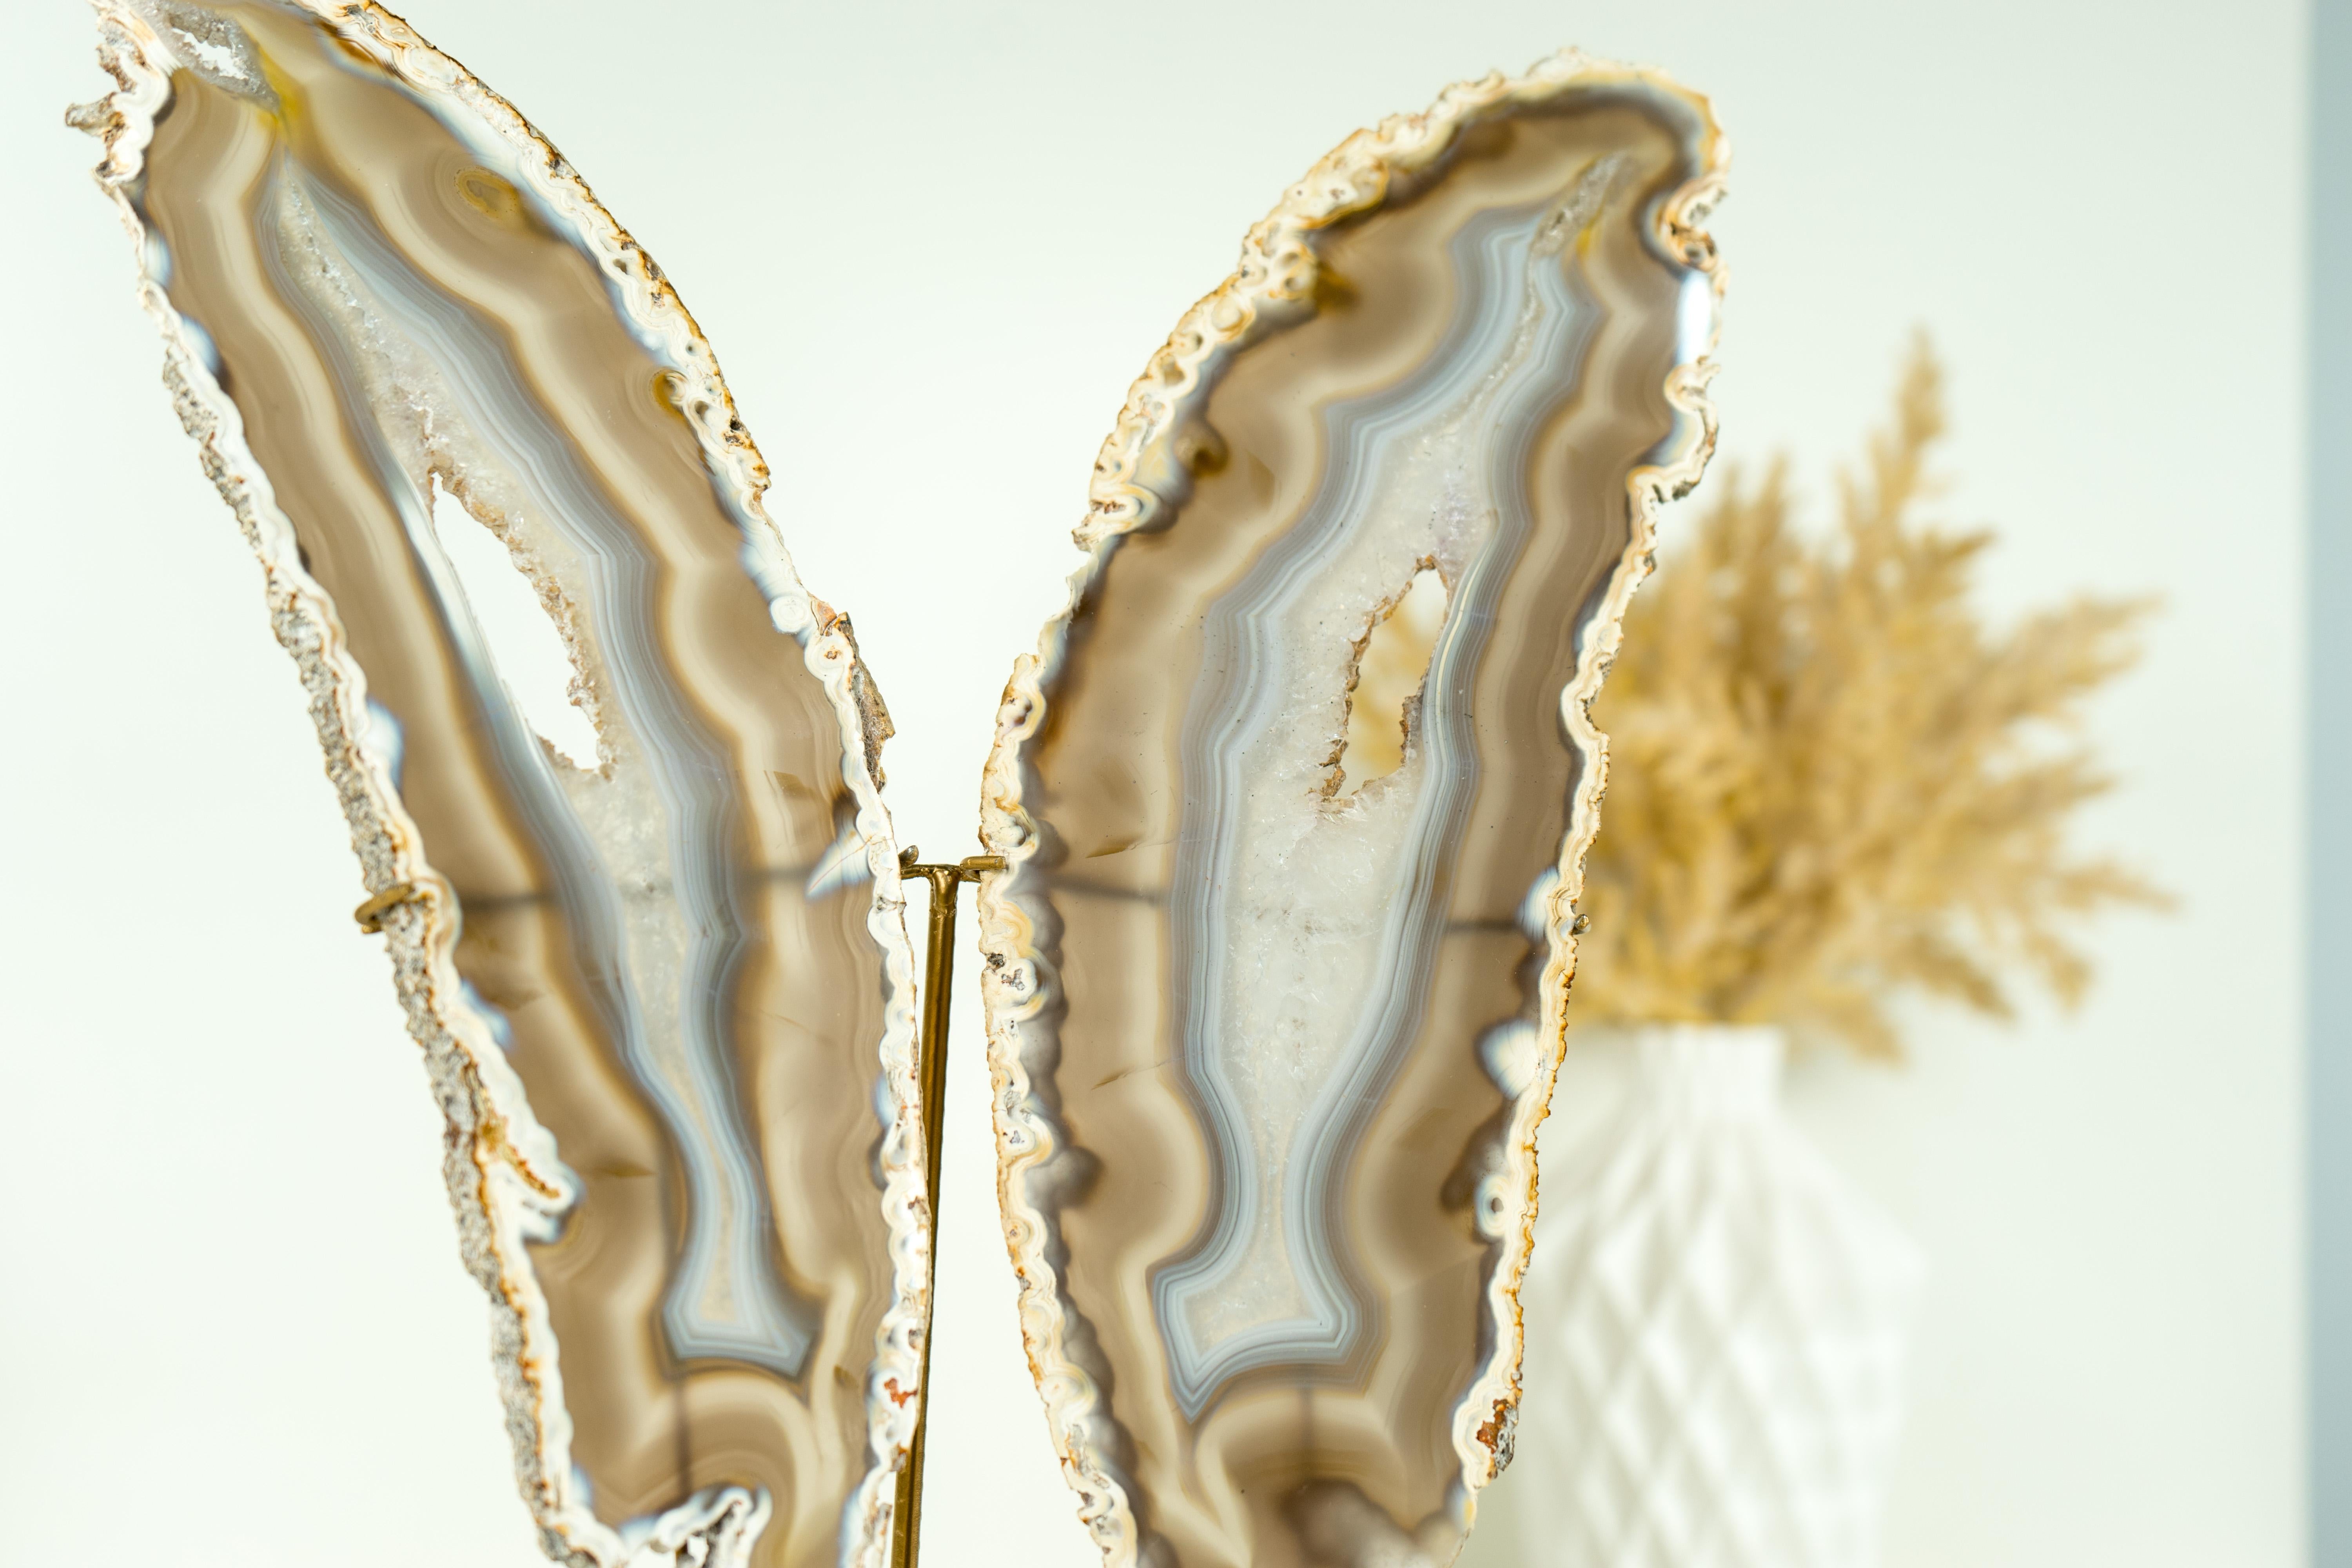 This stunning Agate Butterfly Wing displays beautiful natural patterns created by delicate agate lines, which naturally mix with crystal quartz. It also showcases a rare iridescent effect, most pronounced when lit from behind. The agate is